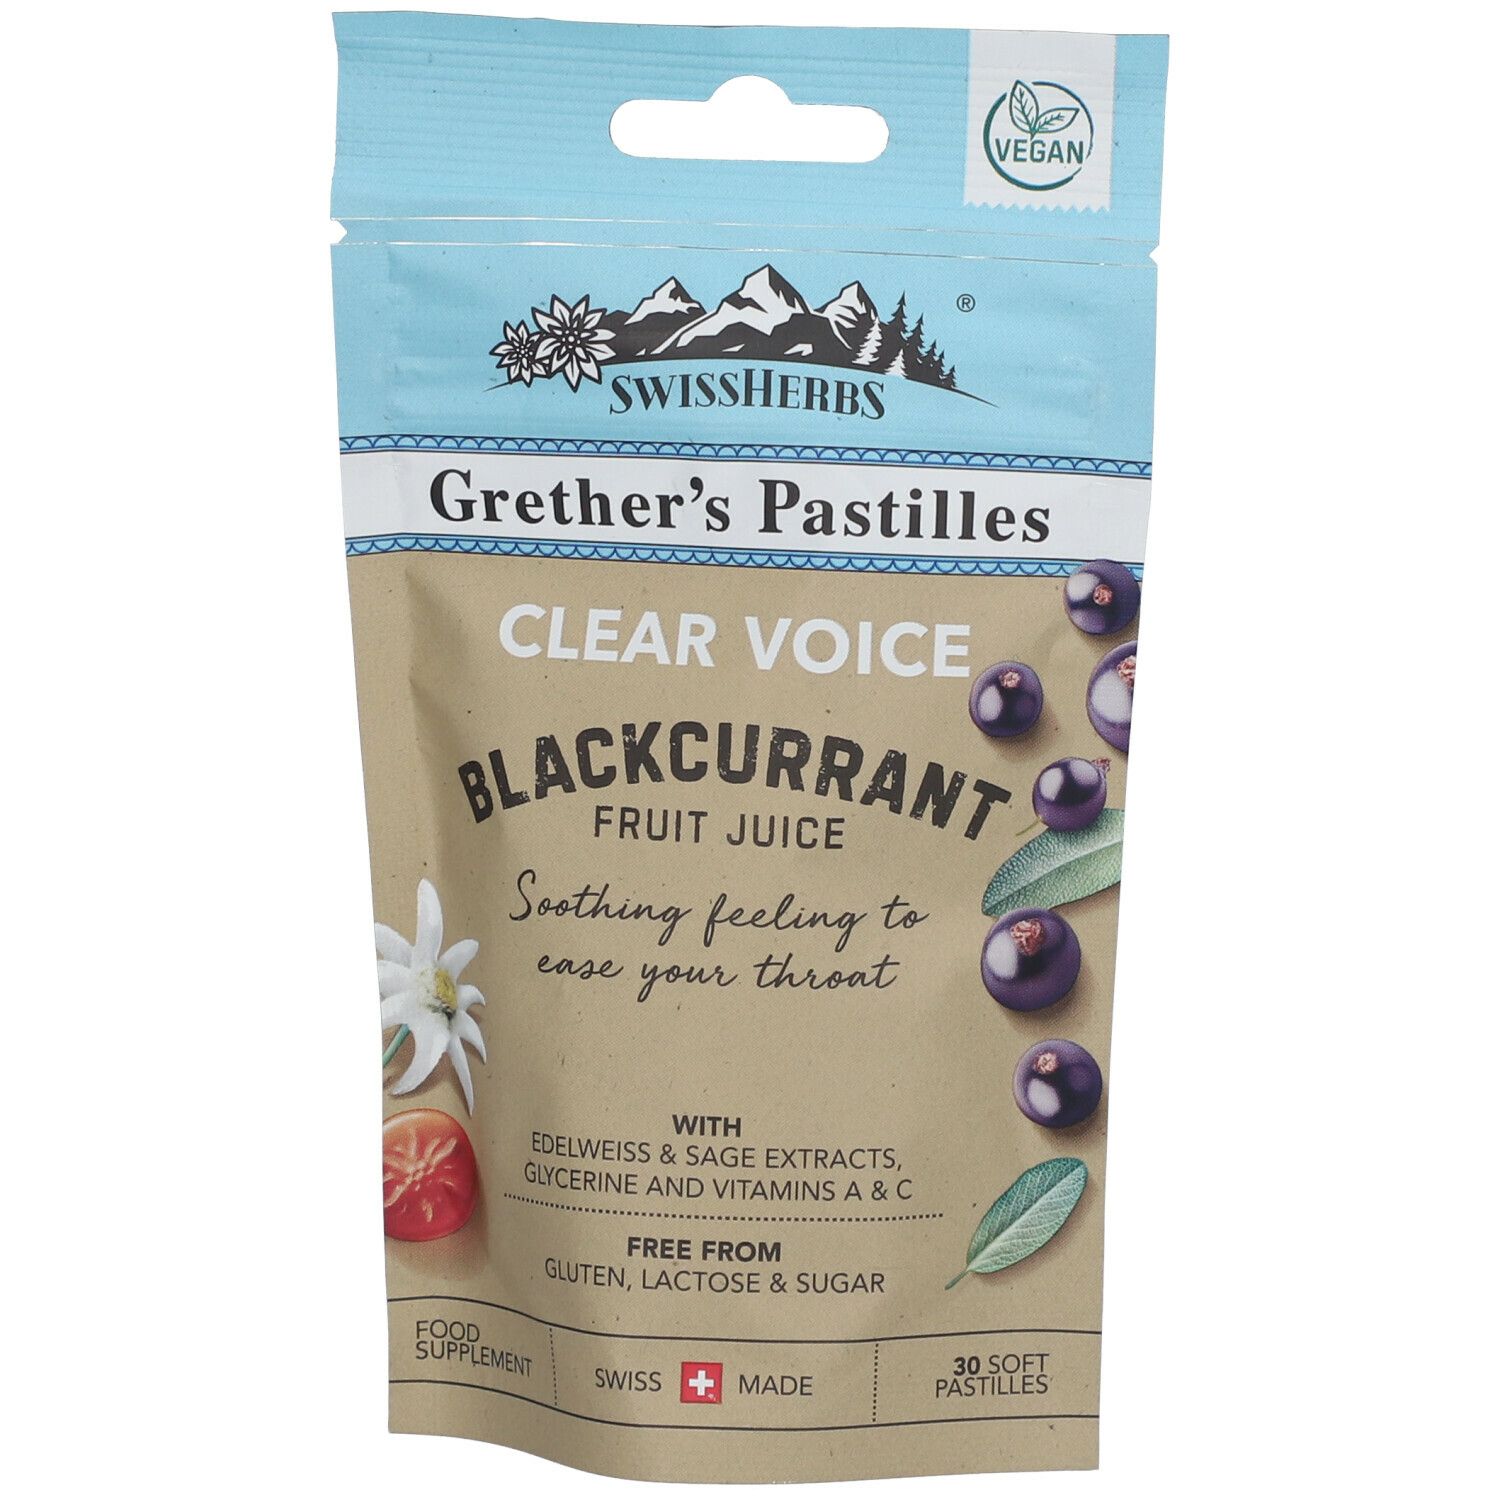 SWISSHERBS® Grether's Pastilles CLEAR VOICE BLACKCURRANT